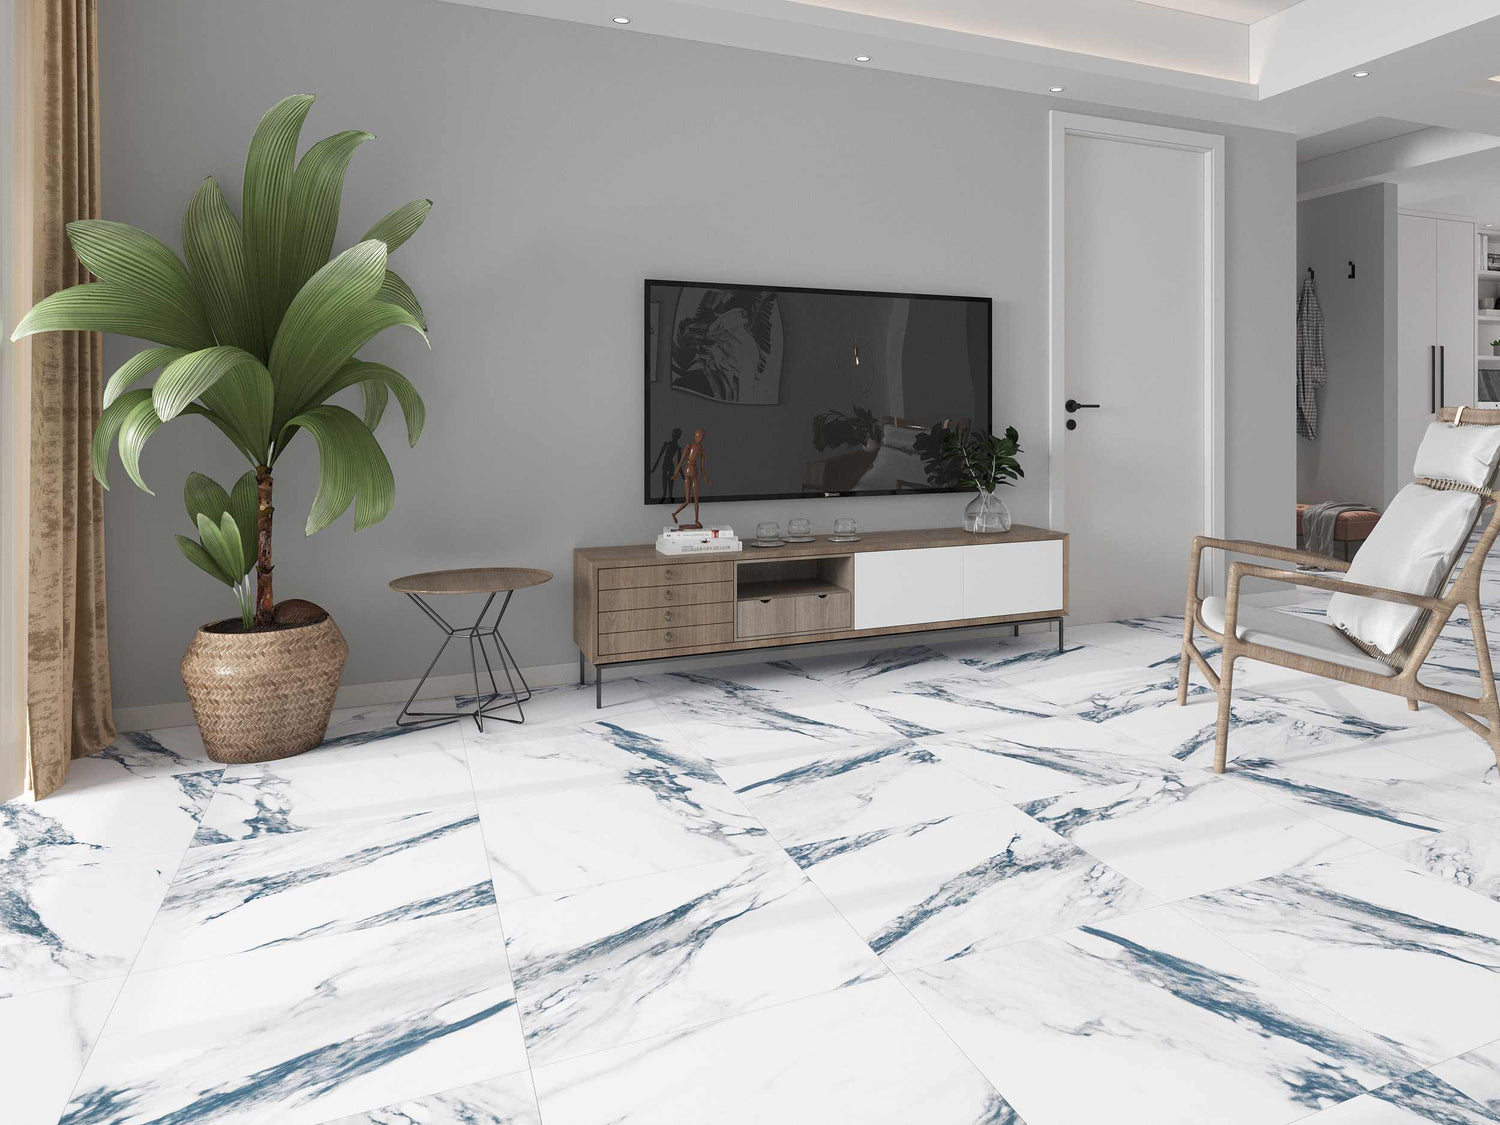 More About MARBLE MUSE